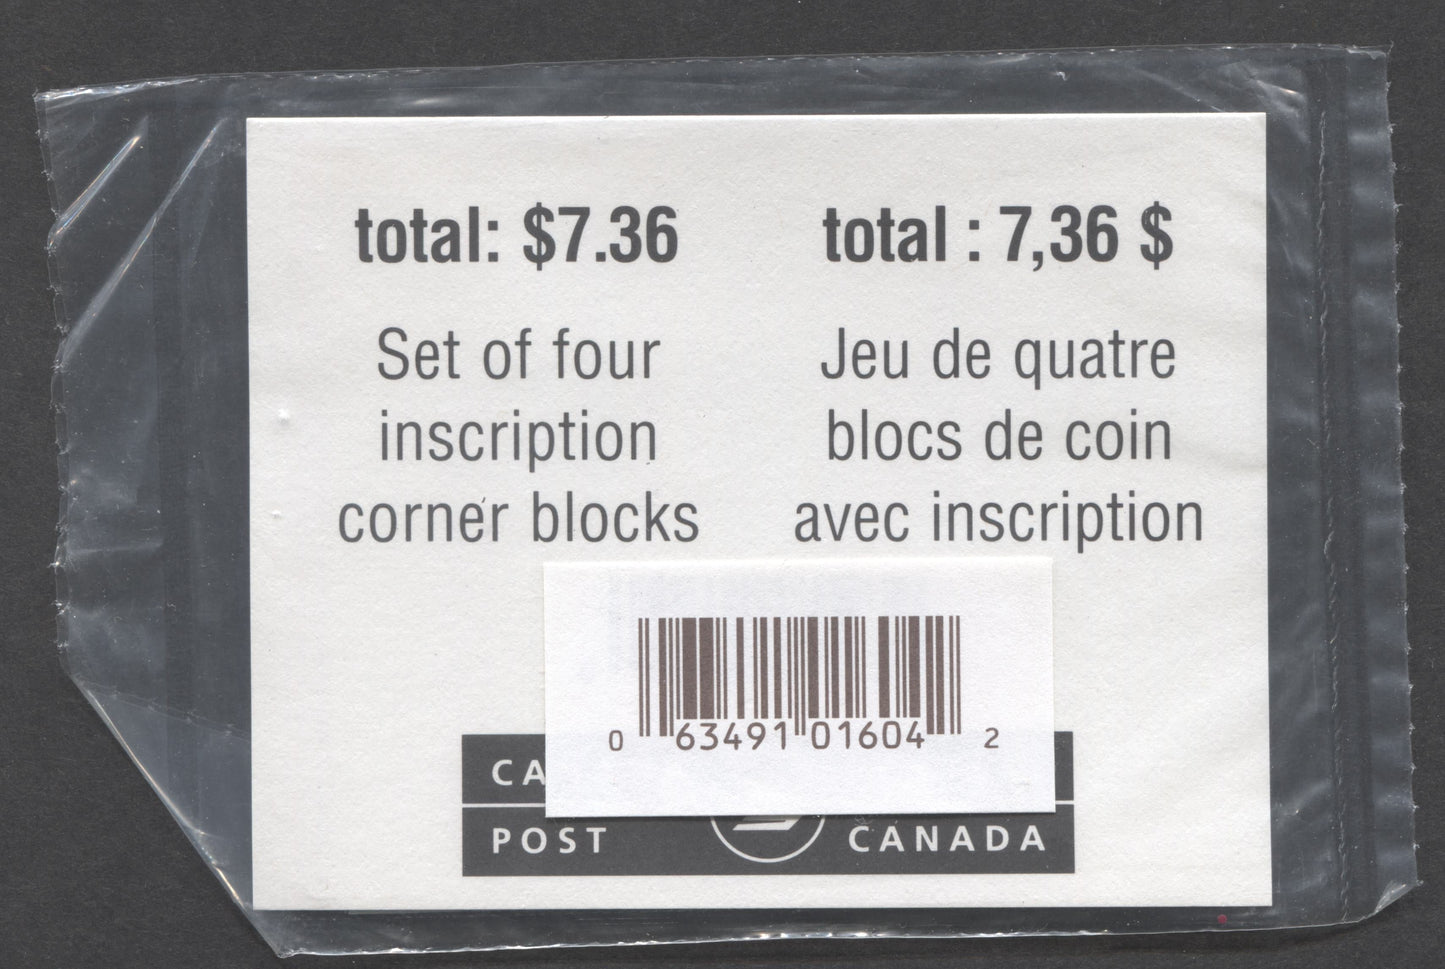 Lot 355 Canada #1842a 46c Multicolored Canadian Warbler - Blue Jay 2000 Birds Of Canada -5, Canada Post Sealed Pack of Inscription Blocks on TRC Paper With HB Type 7D Insert Card, VFNH, Unitrade Cat. $25